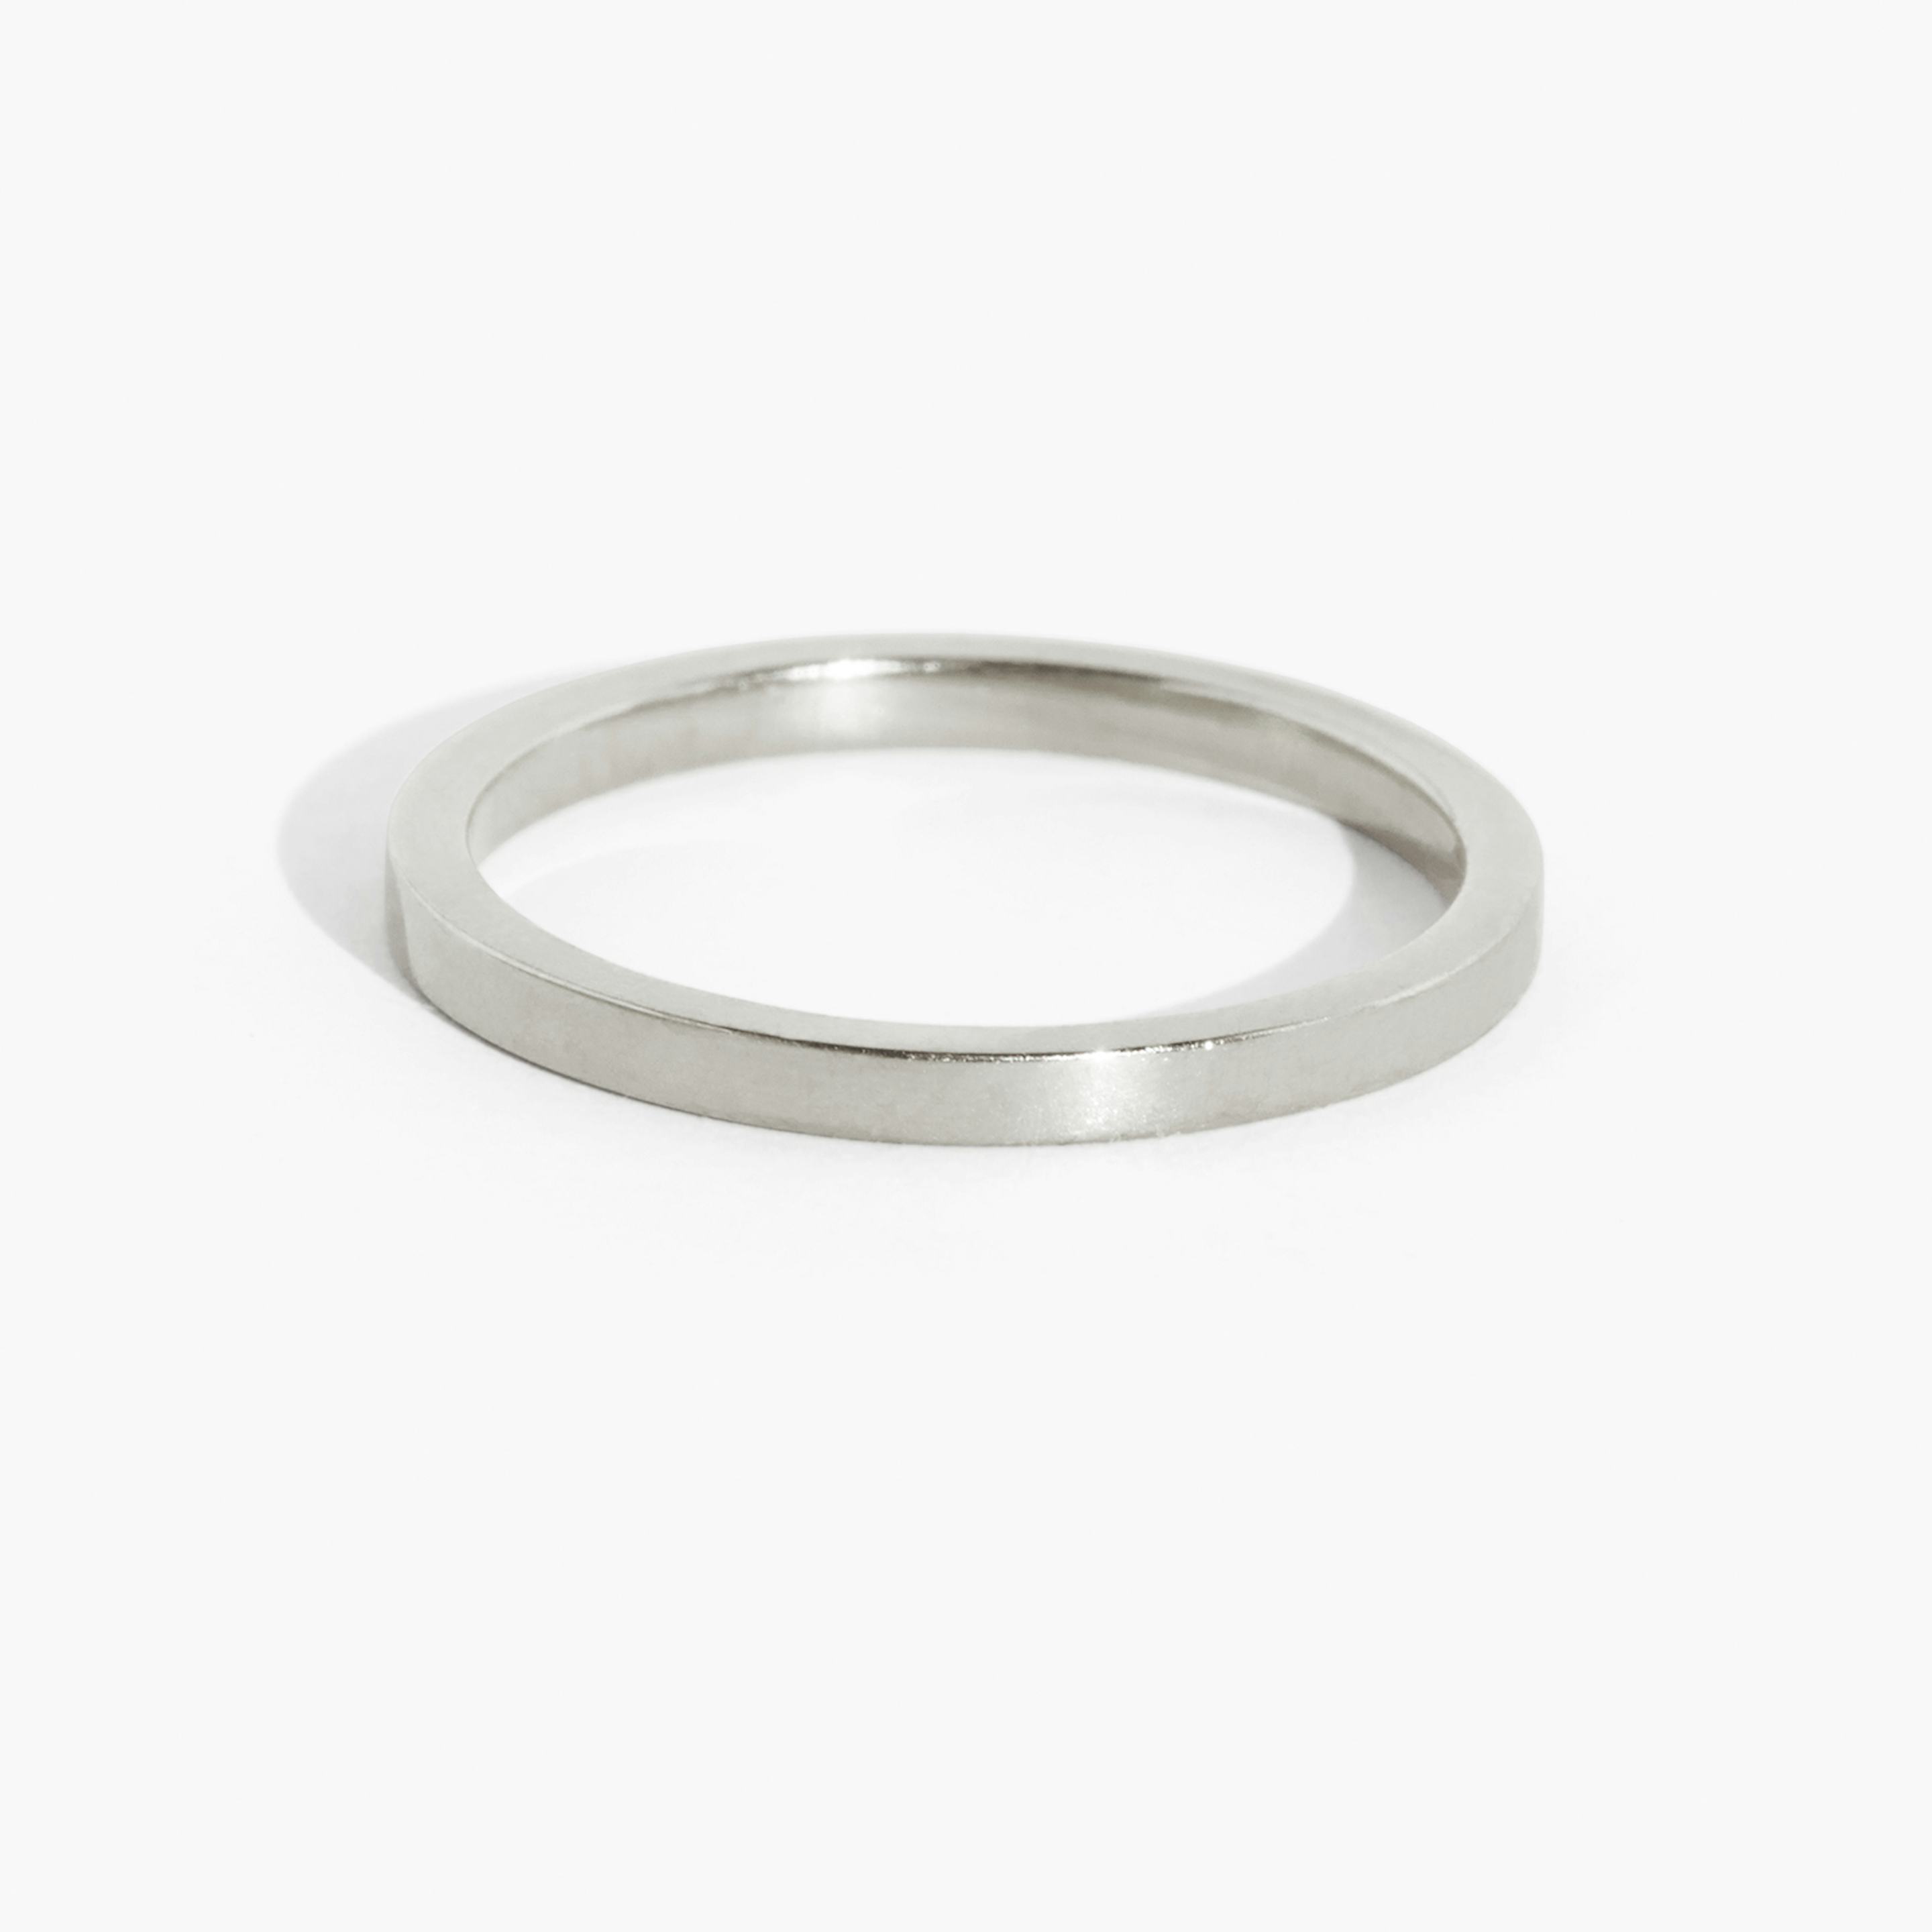 The Flat | Platinum | Band width: Small - 1.5mm